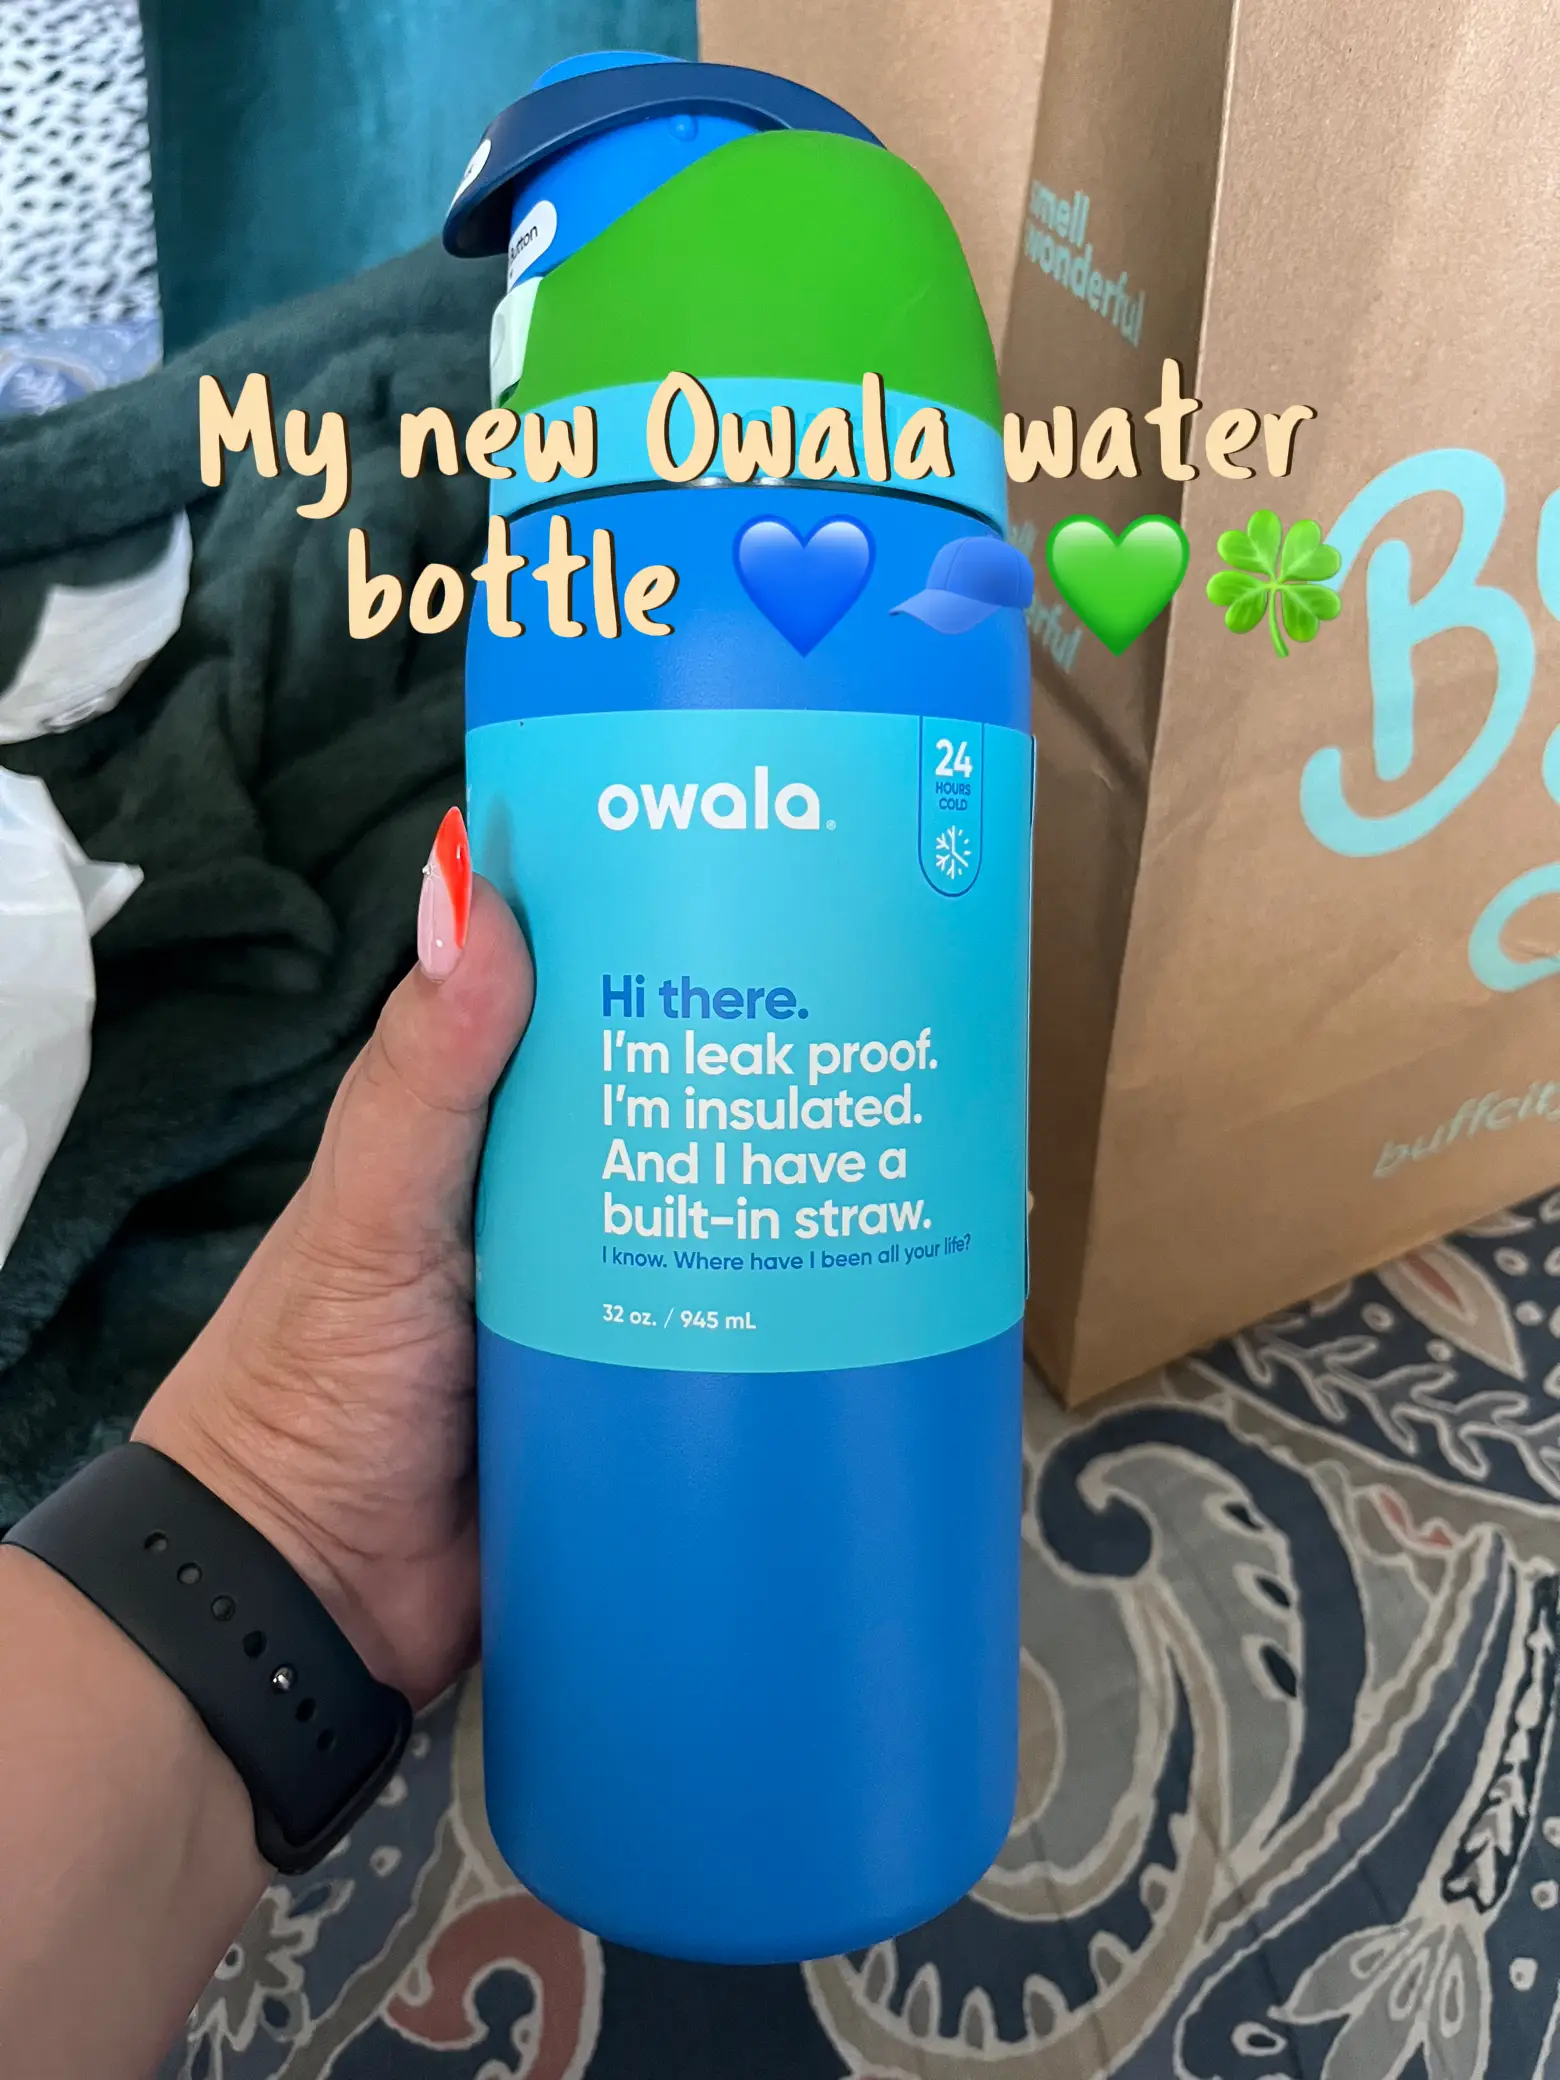 My new Owala water bottle 💙🧢💚🍀, Gallery posted by Danielle_eeee